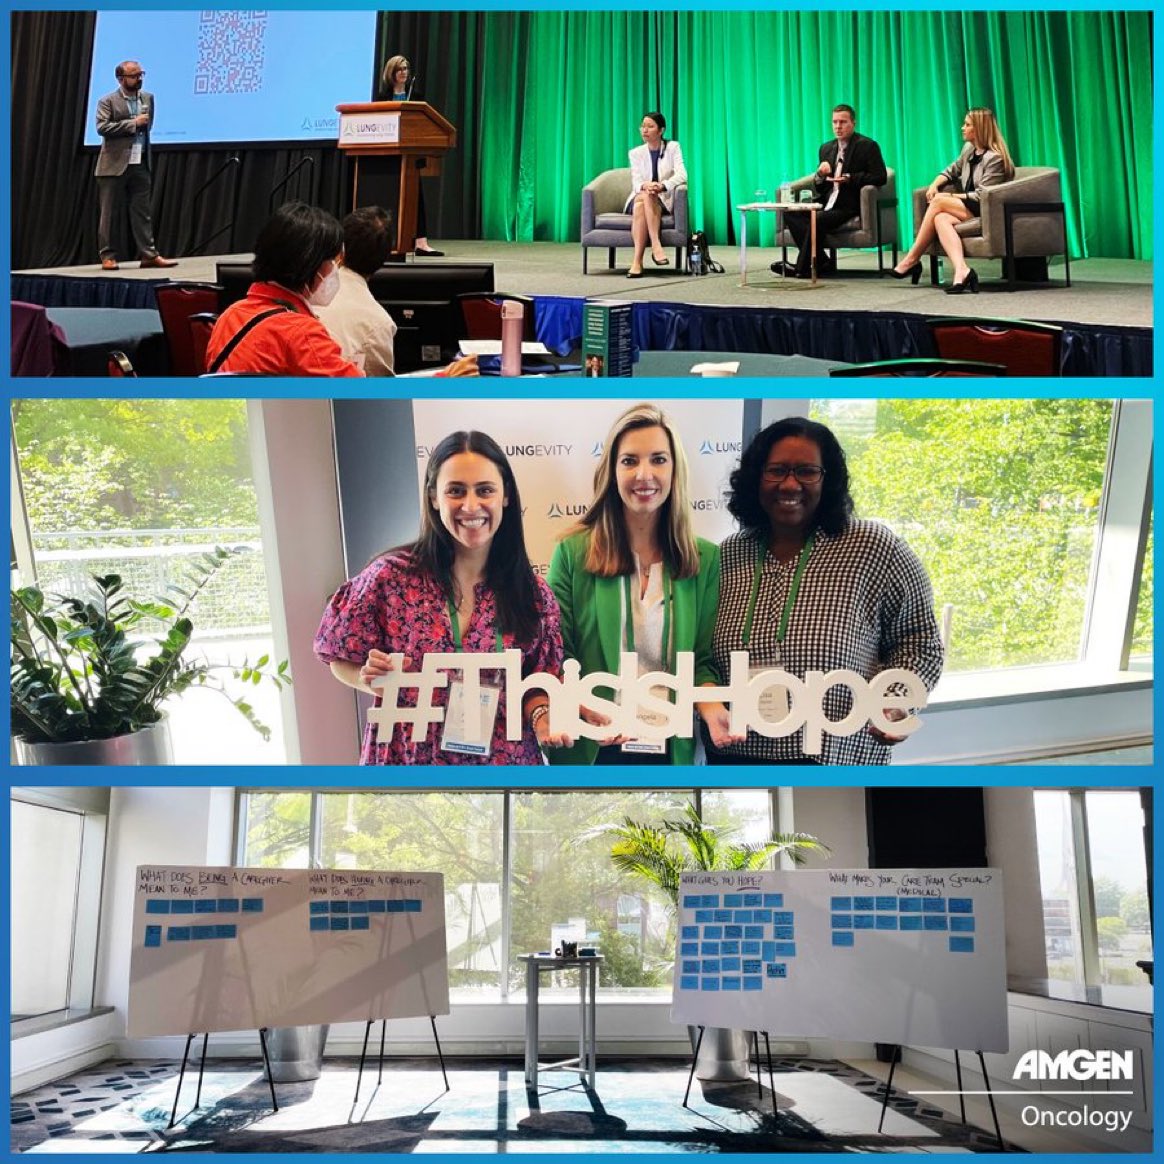 It was a pleasure attending @LUNGevity's annual #HOPESummit. @Amgen is proud to support this unique conference where patients and survivors come together to learn about living well with cancer. #ThisIsHOPE23 #AmgenSupported @AmgenOncology